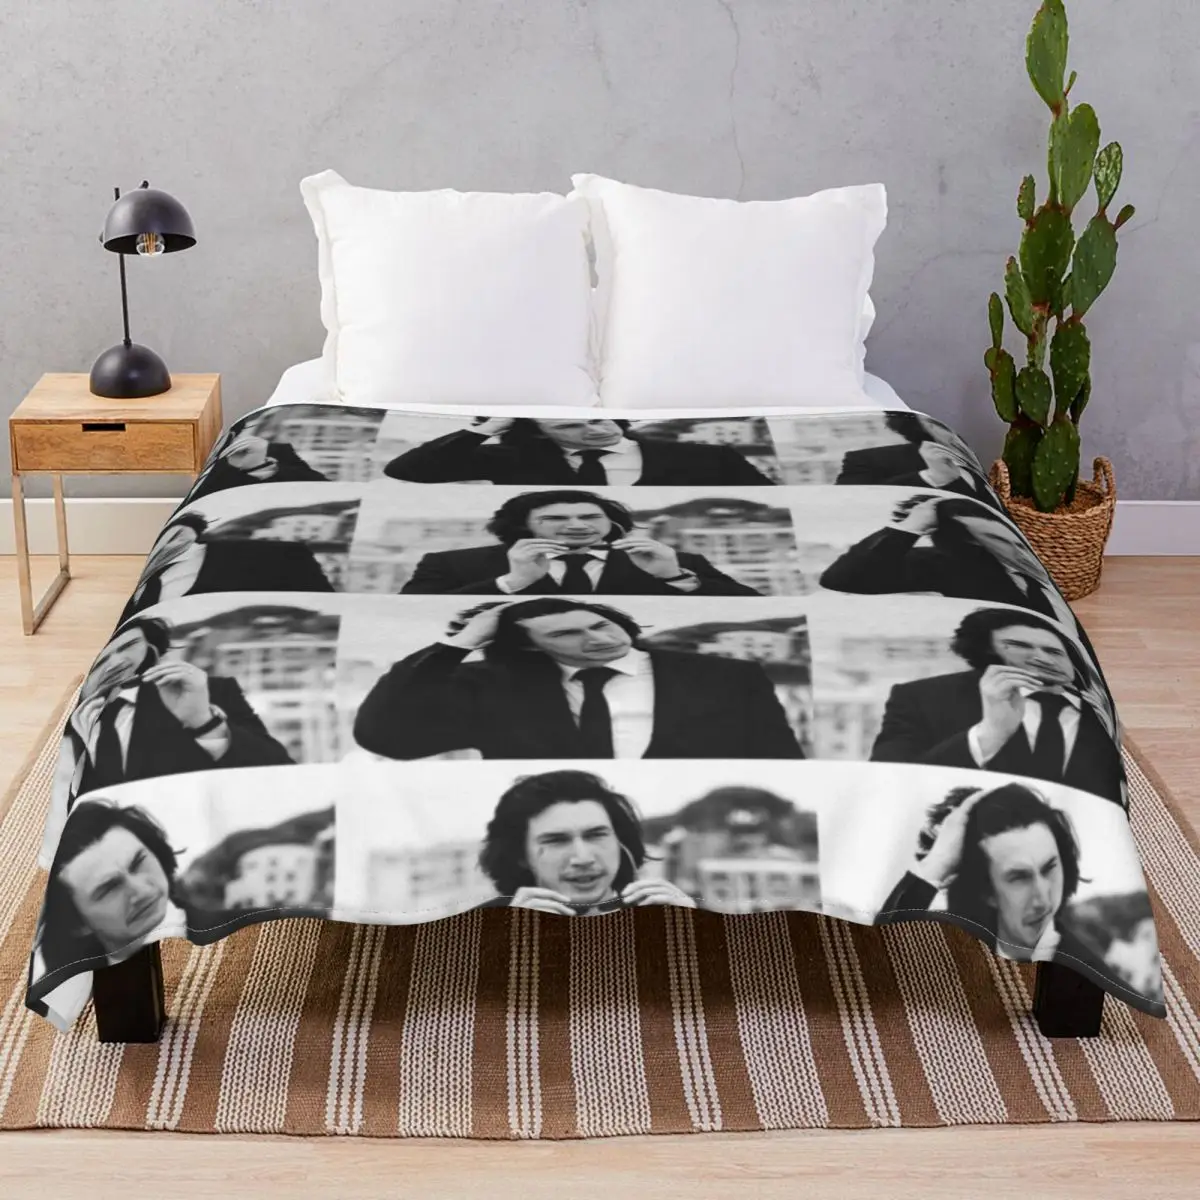 Cannes Adam Driver Edit Blankets Fleece Winter Ultra-Soft Throw Blanket for Bed Home Couch Travel Office